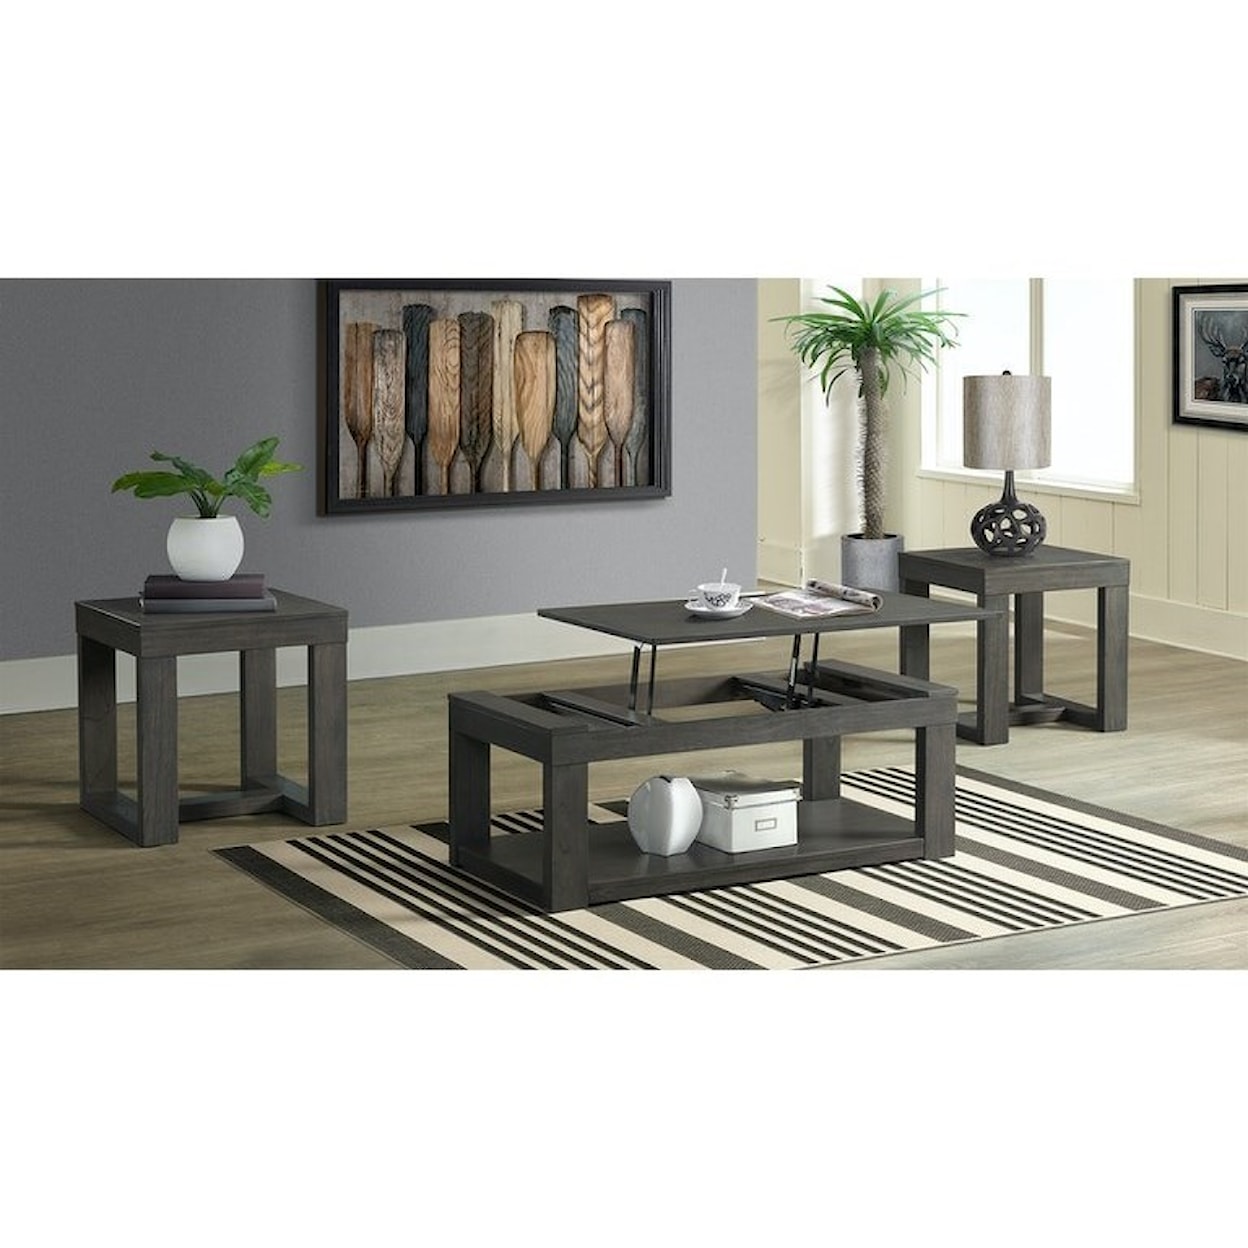 Elements International Benton Occasional Table Group